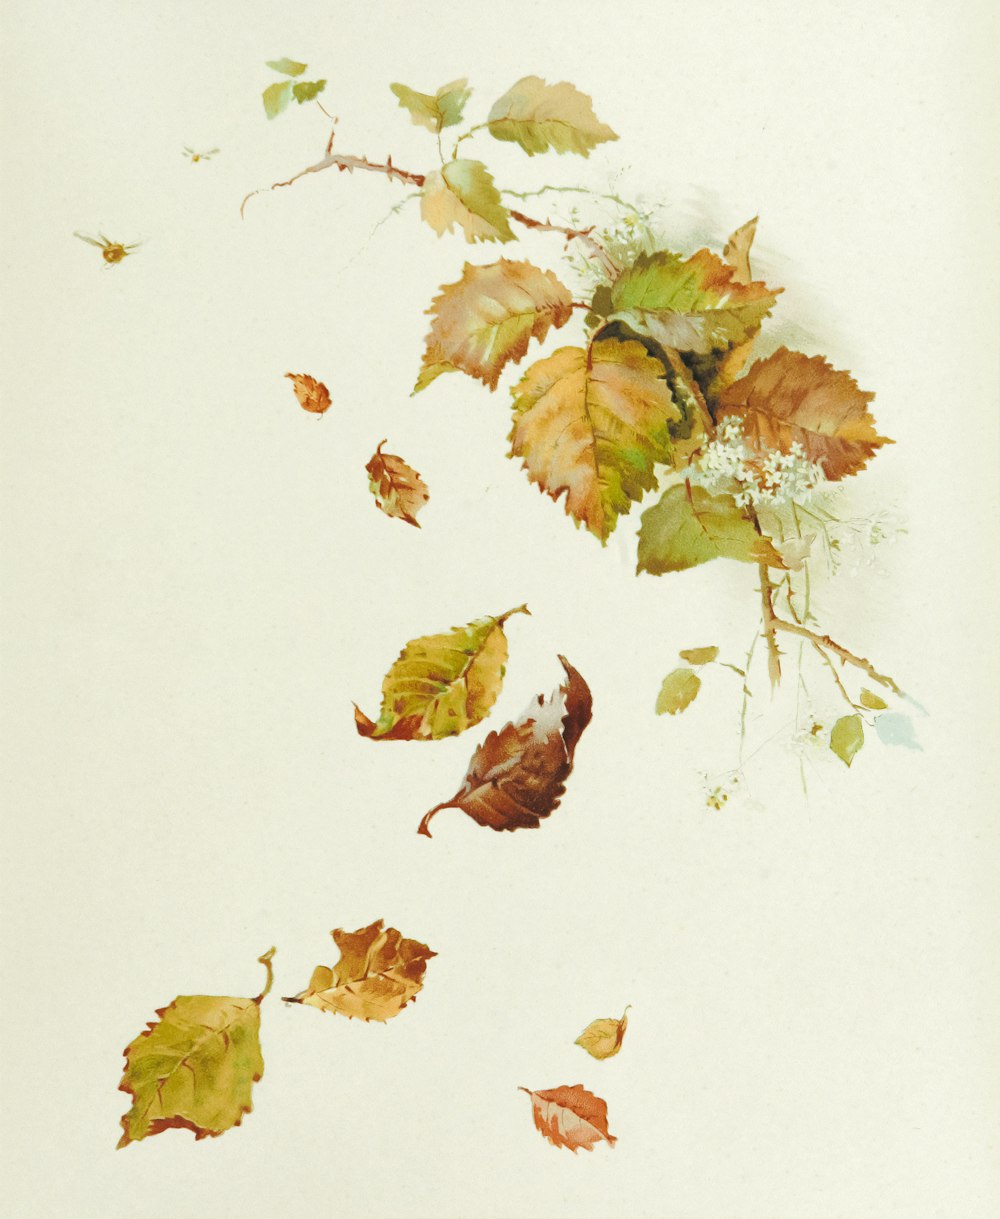 brown leaves on white surface